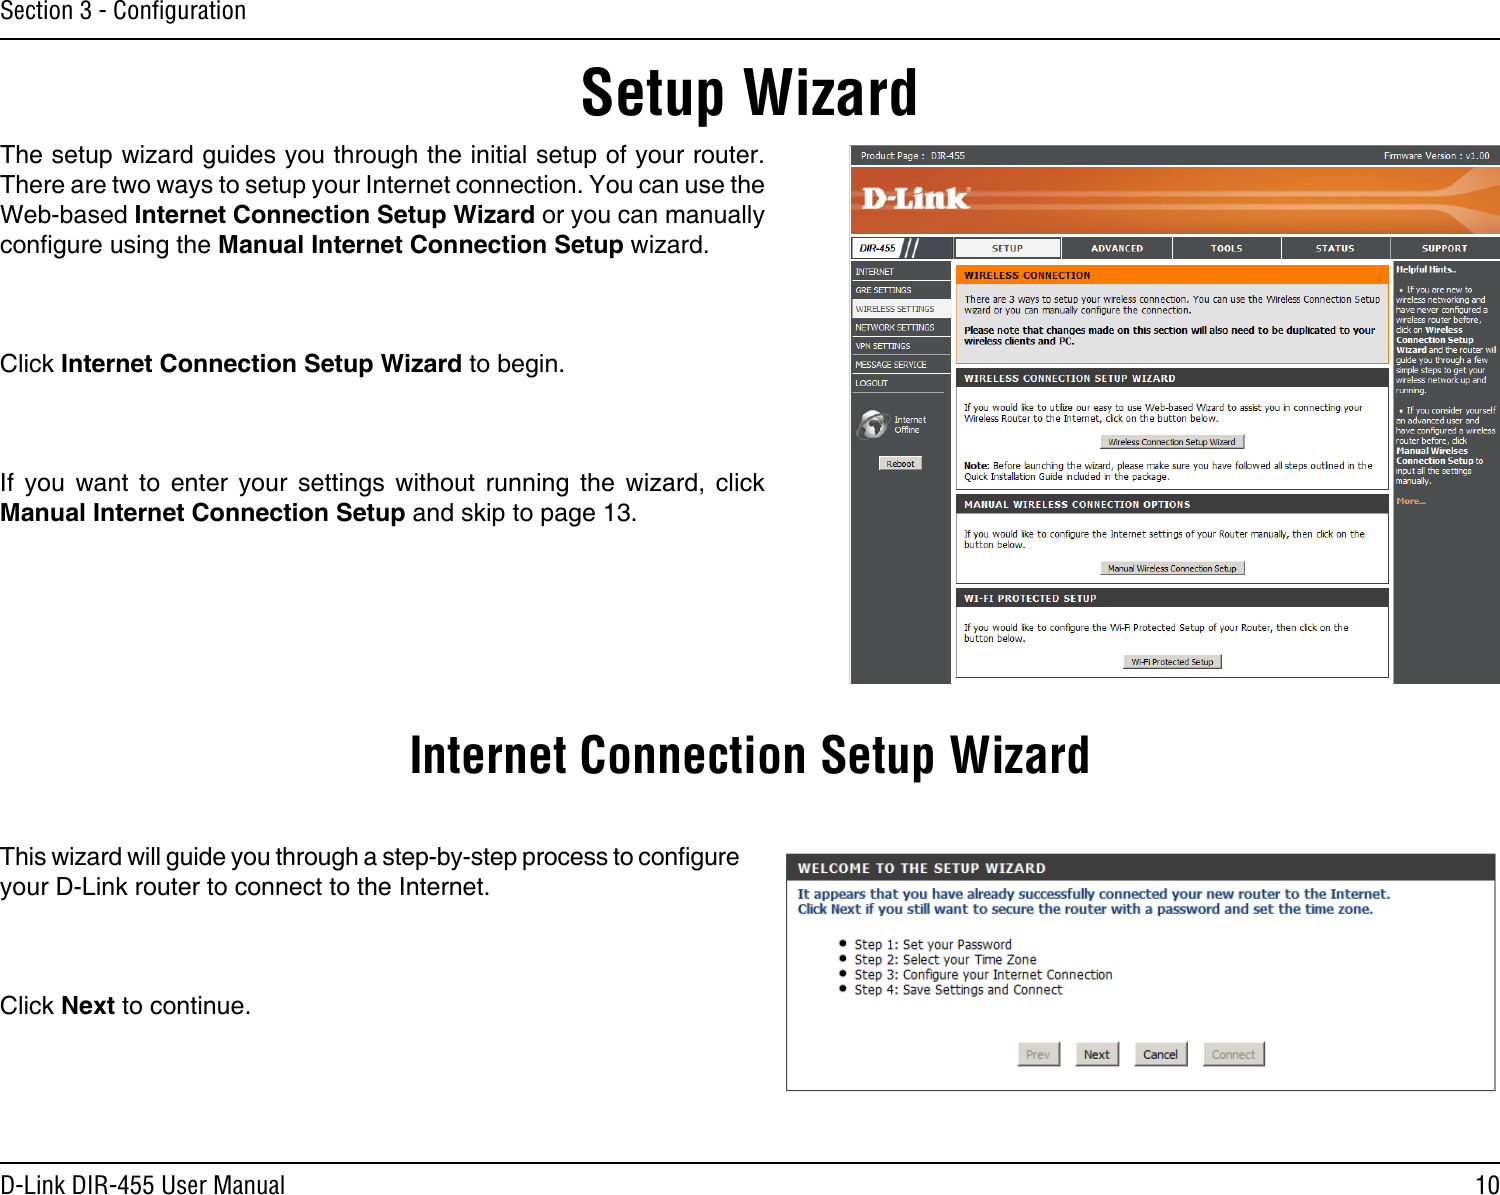 10D-Link DIR-455 User ManualSection 3 - ConﬁgurationSetup WizardThe setup wizard guides you through the initial setup of your router. There are two ways to setup your Internet connection. You can use the Web-based Internet Connection Setup Wizard or you can manually congure using the Manual Internet Connection Setup wizard.Click Internet Connection Setup Wizard to begin.If  you  want  to  enter  your  settings  without  running  the  wizard,  click Manual Internet Connection Setup and skip to page 13.This wizard will guide you through a step-by-step process to congure your D-Link router to connect to the Internet.Click Next to continue.Internet Connection Setup Wizard